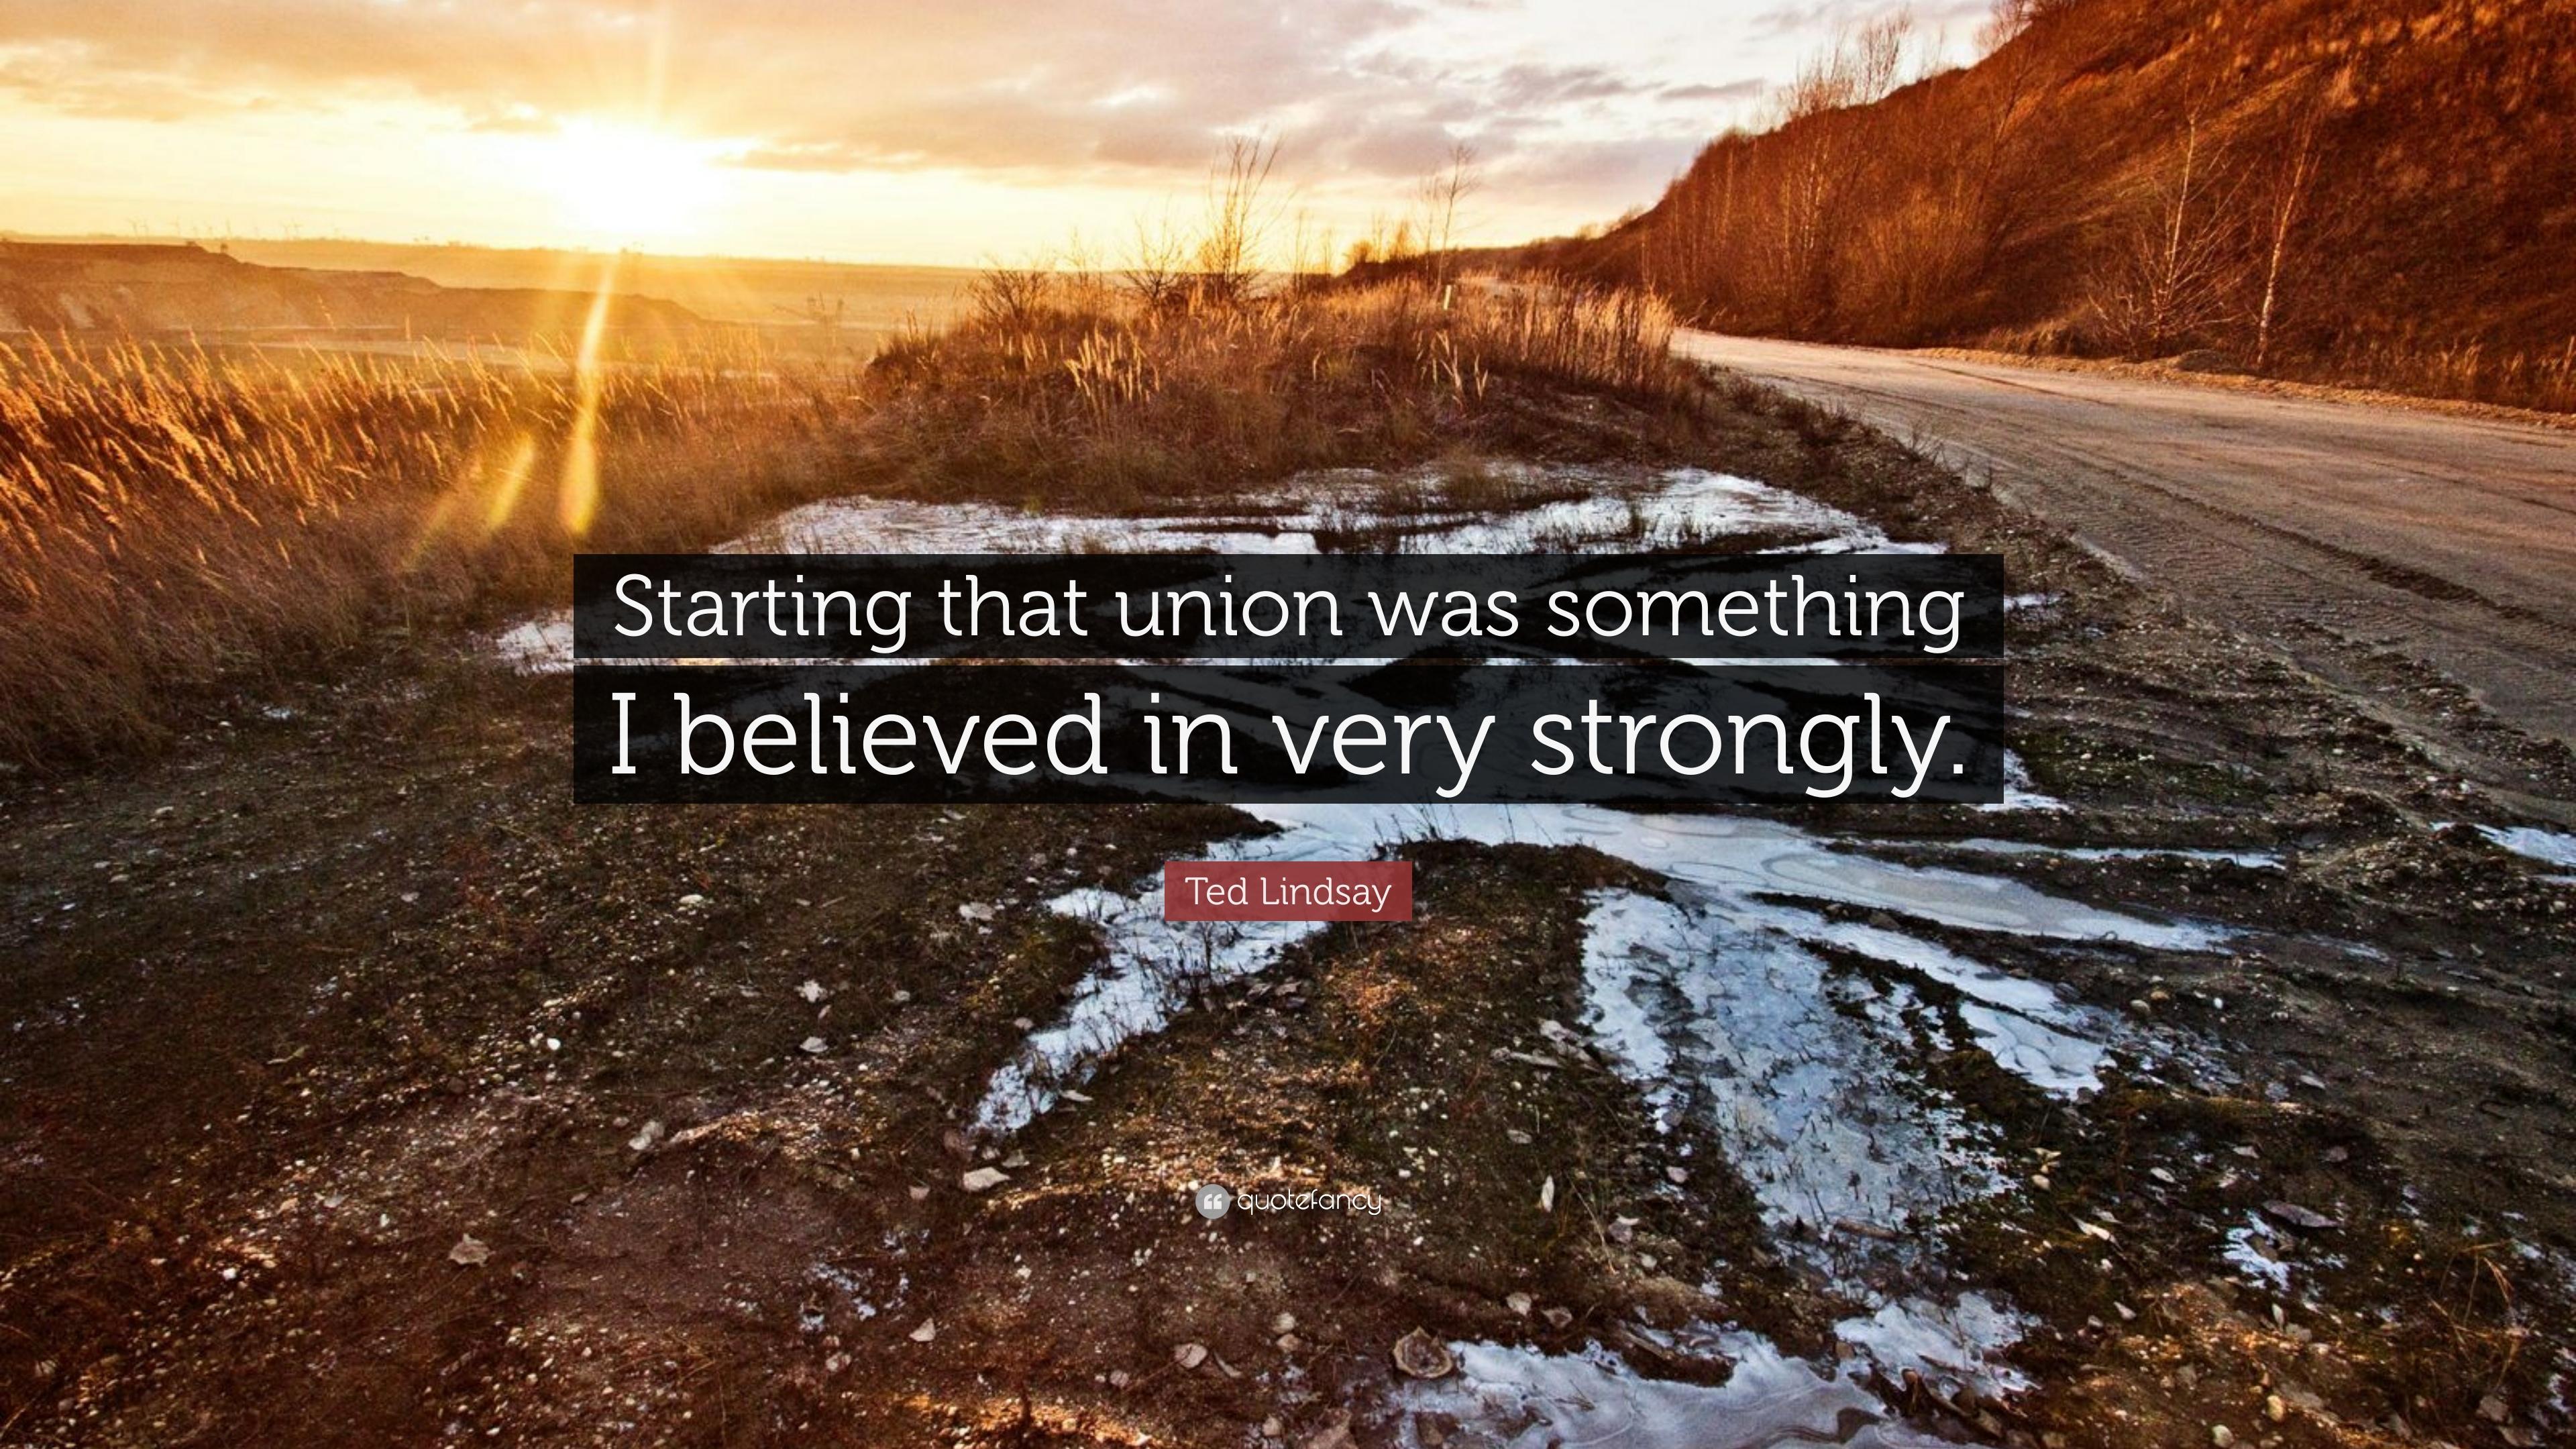 Ted Lindsay Quote: “Starting that union was something I believed